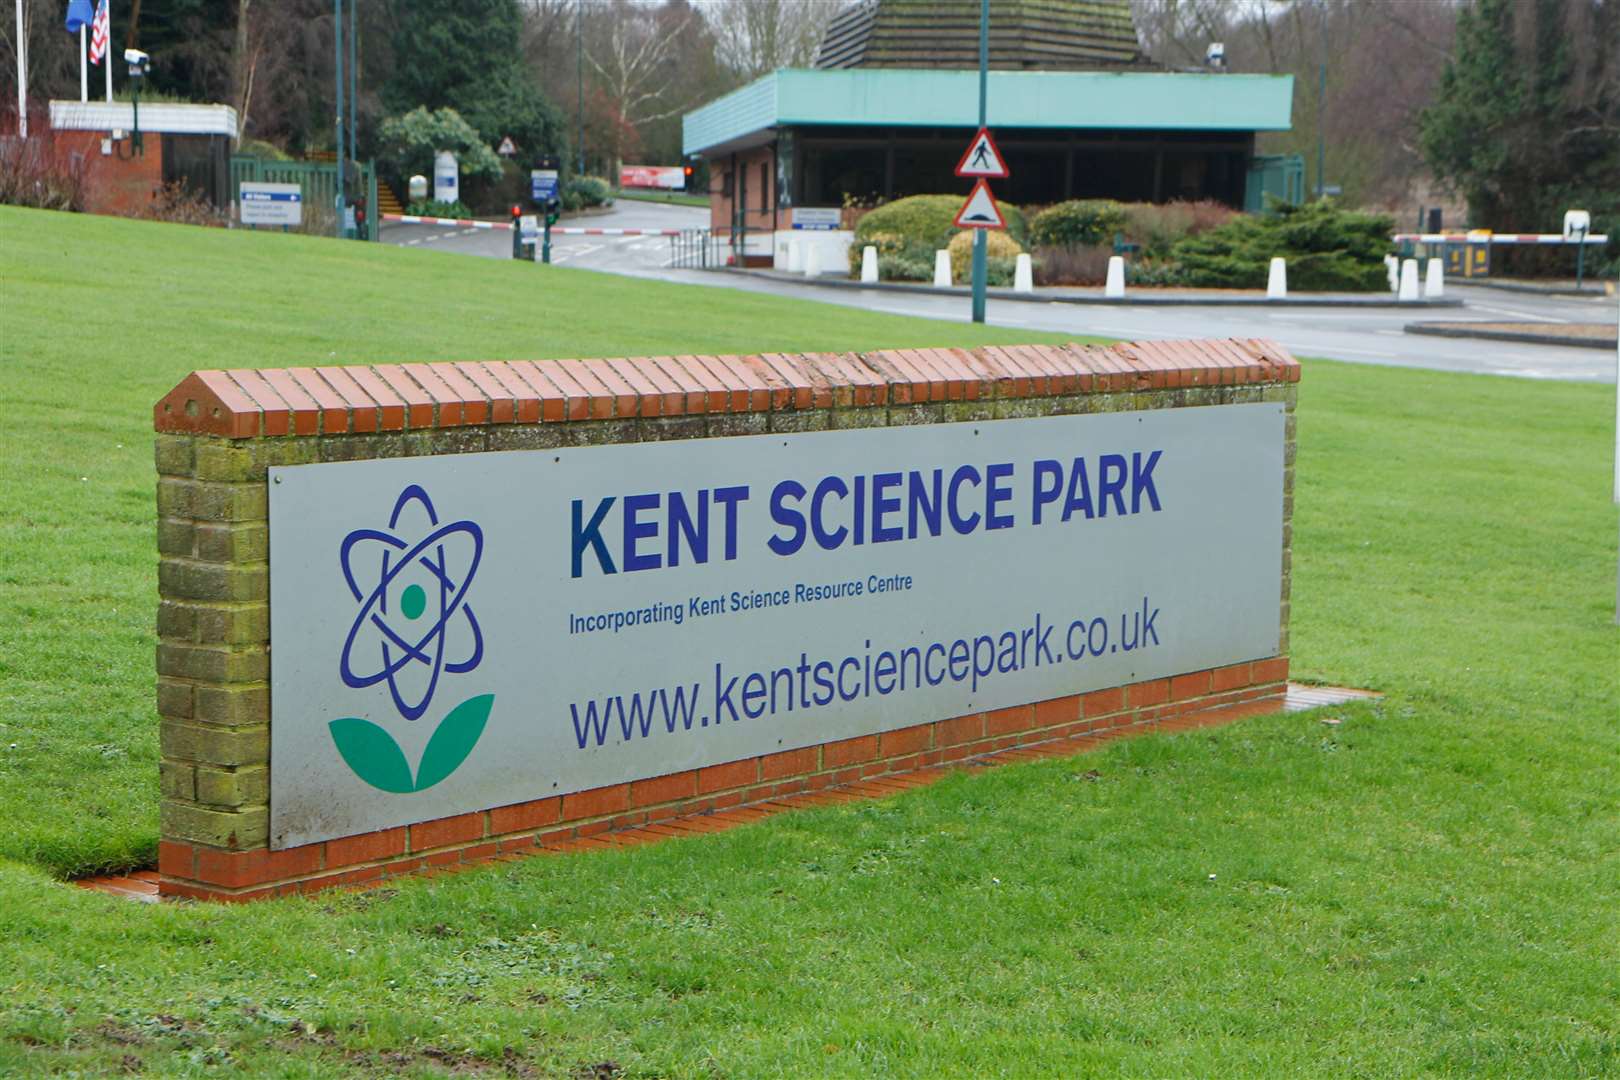 Kent Science Park covers 55-acres in Sittingbourne